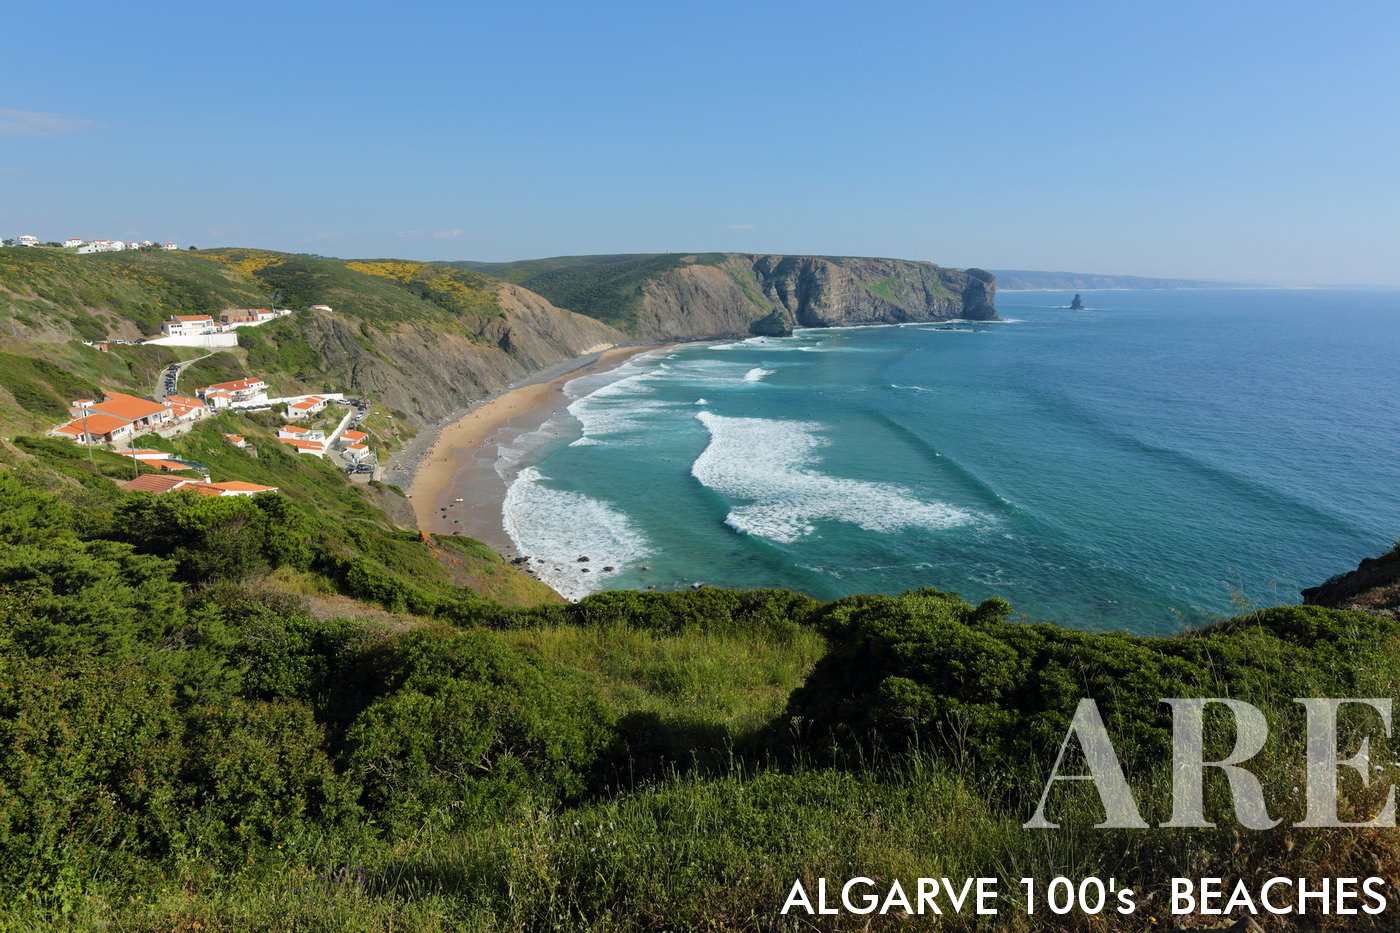 In the South-West Alentejo and Costa Vicentina Natural Park, Portugal, Arrifana Beach emerges as a popular surf spot. A north to south view from atop the cliffs unveils the beauty of this natural setting.